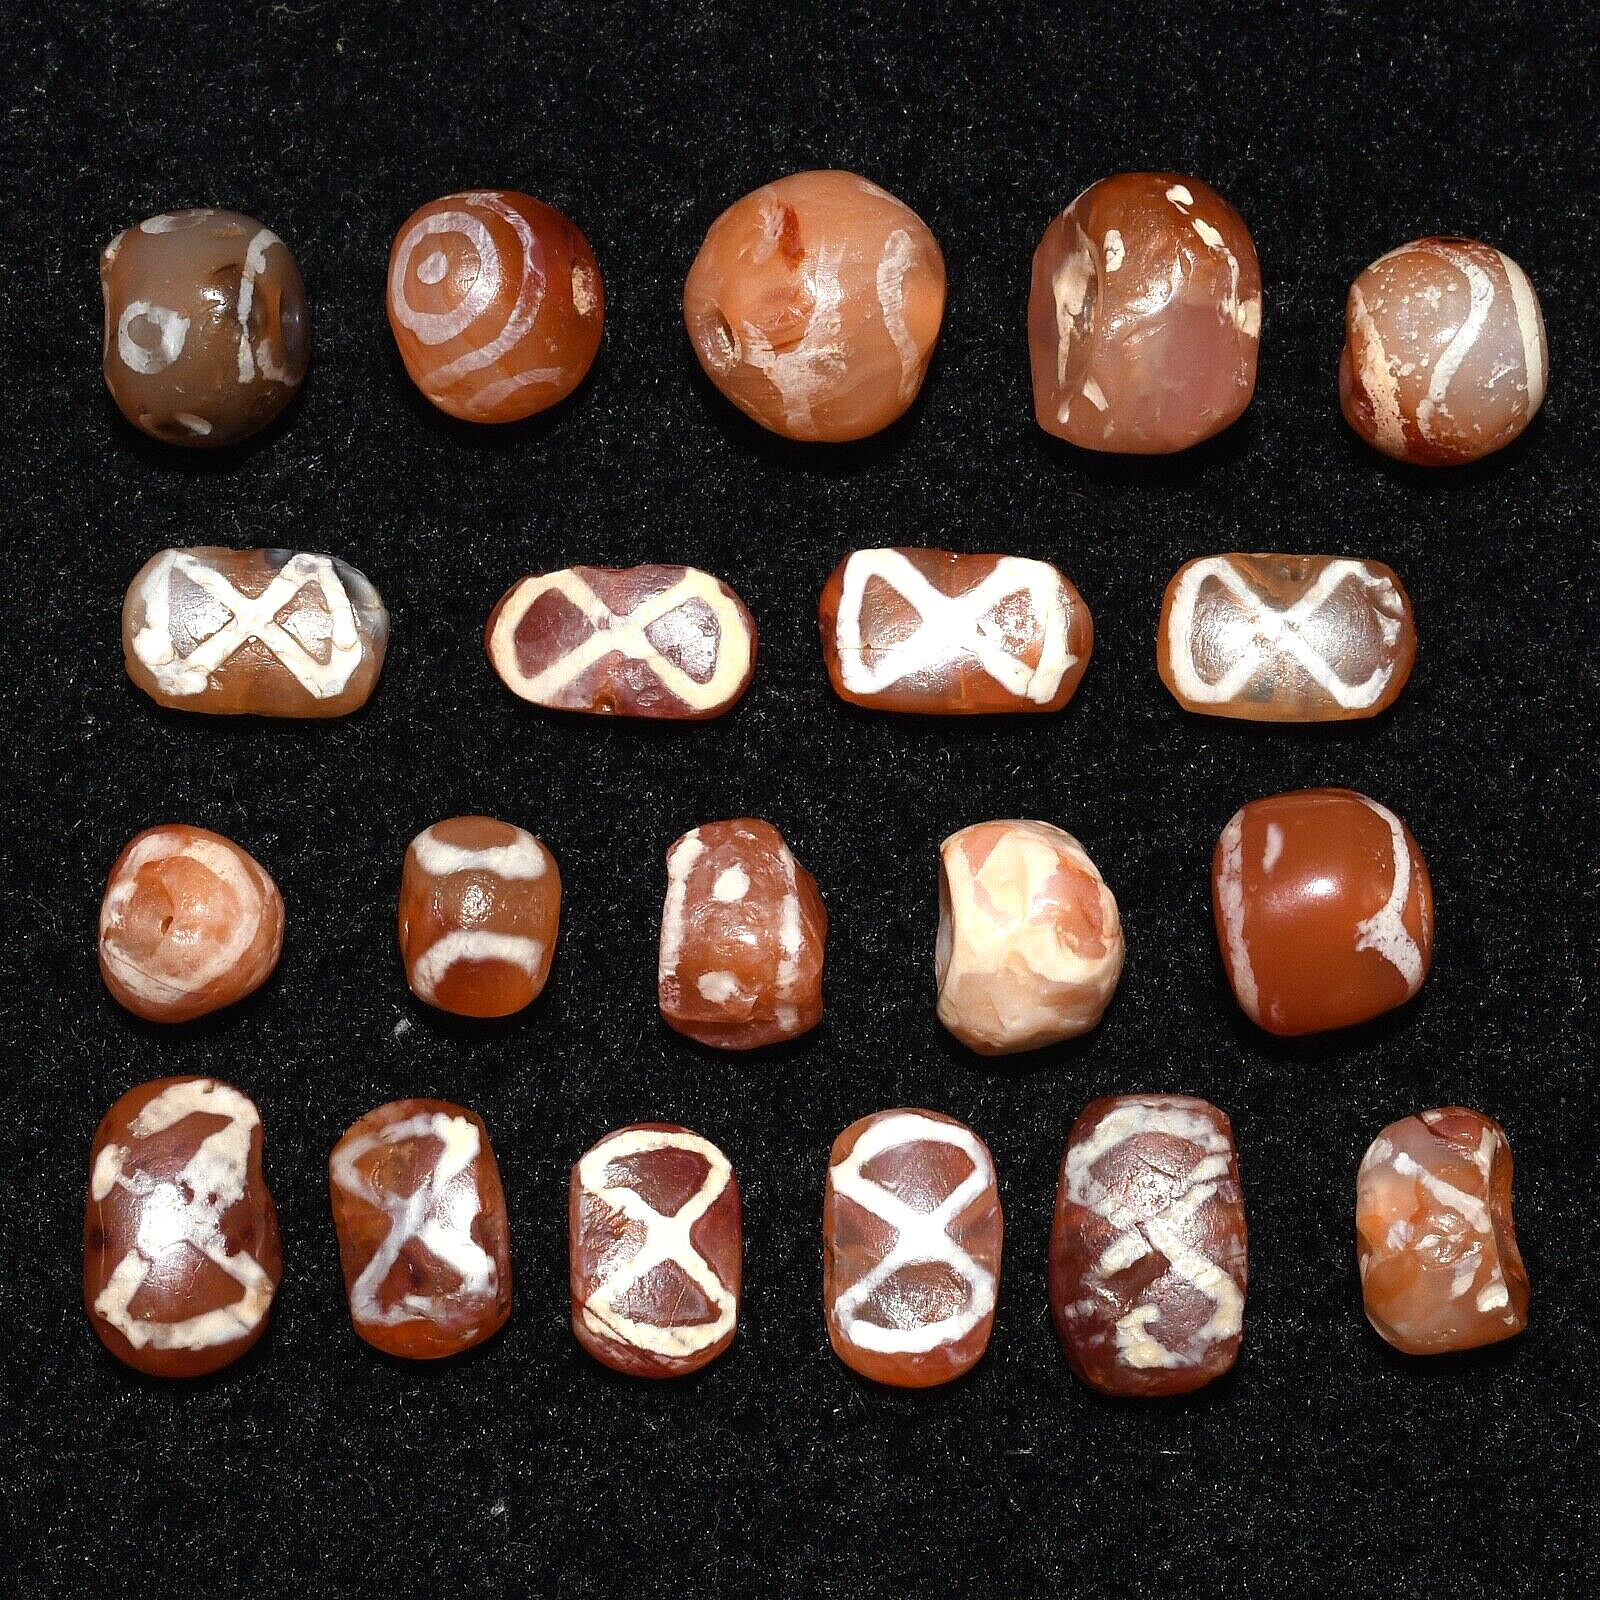 Genuine 20 Ancient Etched Carnelian Beads over 1500 Years Old in Good Condition